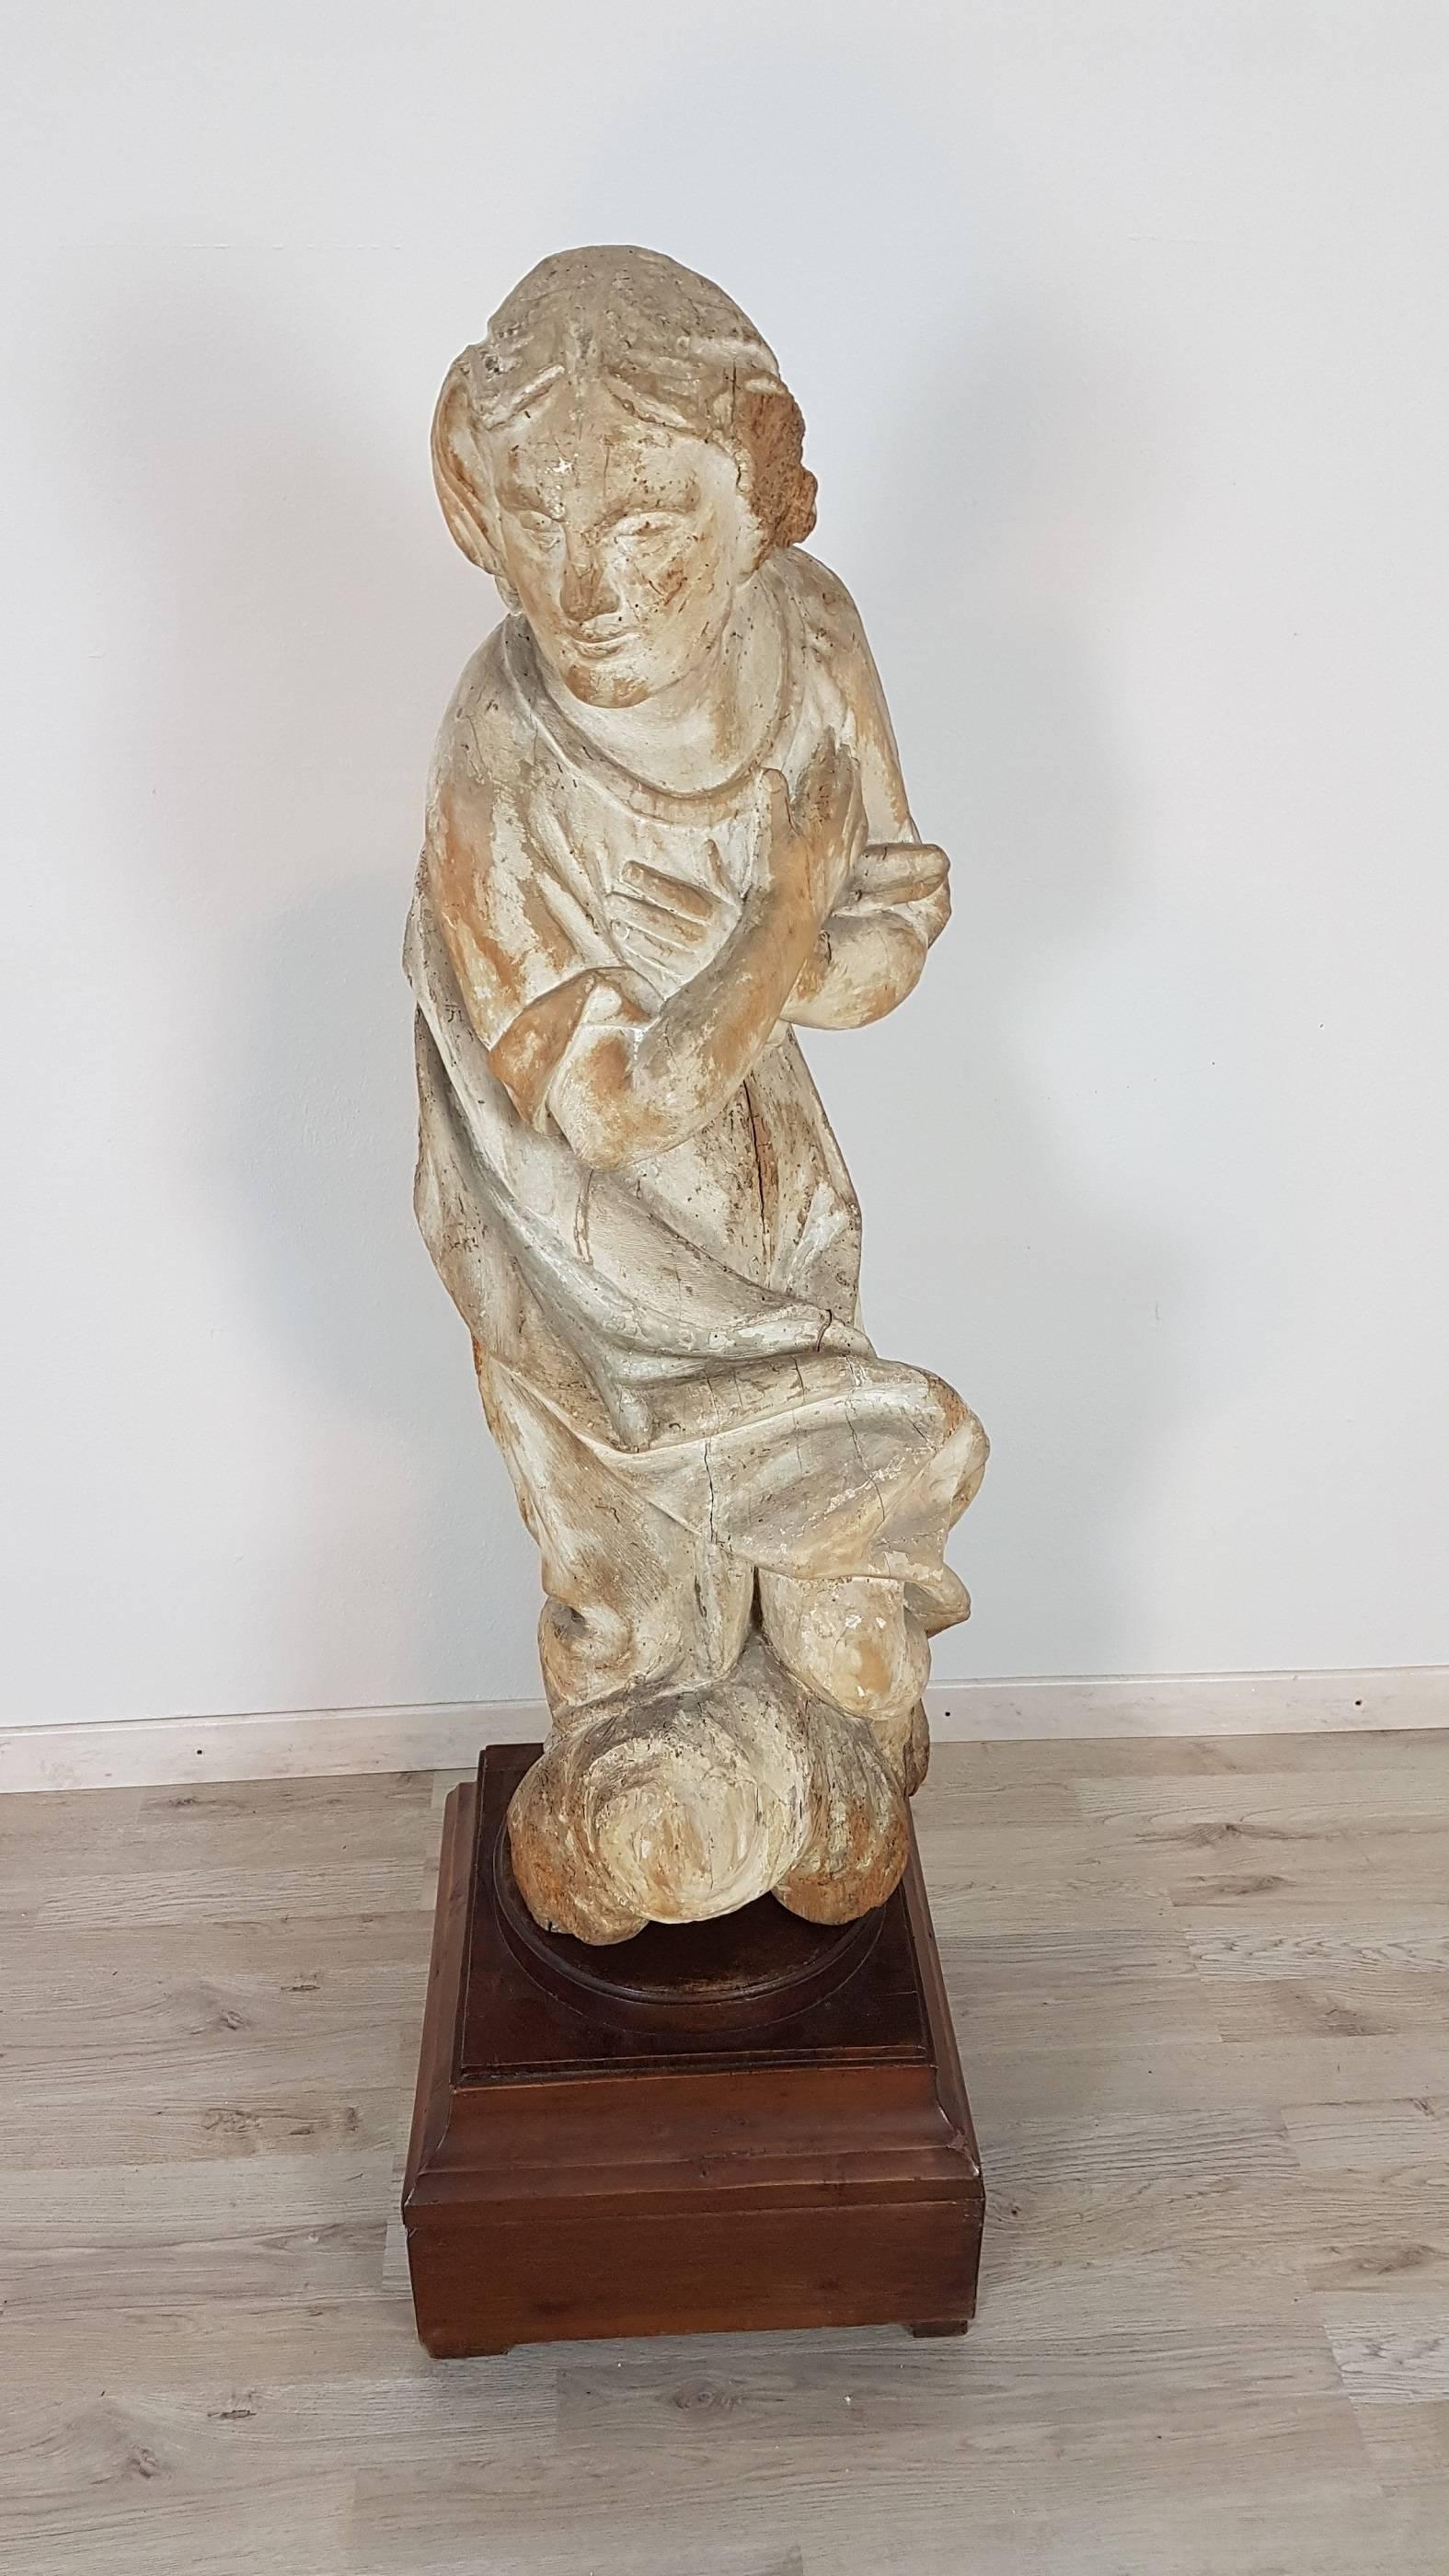 Rare wooden Madonna. The Madonna is represented with great grace in the face and in the pose, the simple dress in the lower part almost tends to wrap it with a movement of the drapery. The backside part is hollow and this suggests that the statue